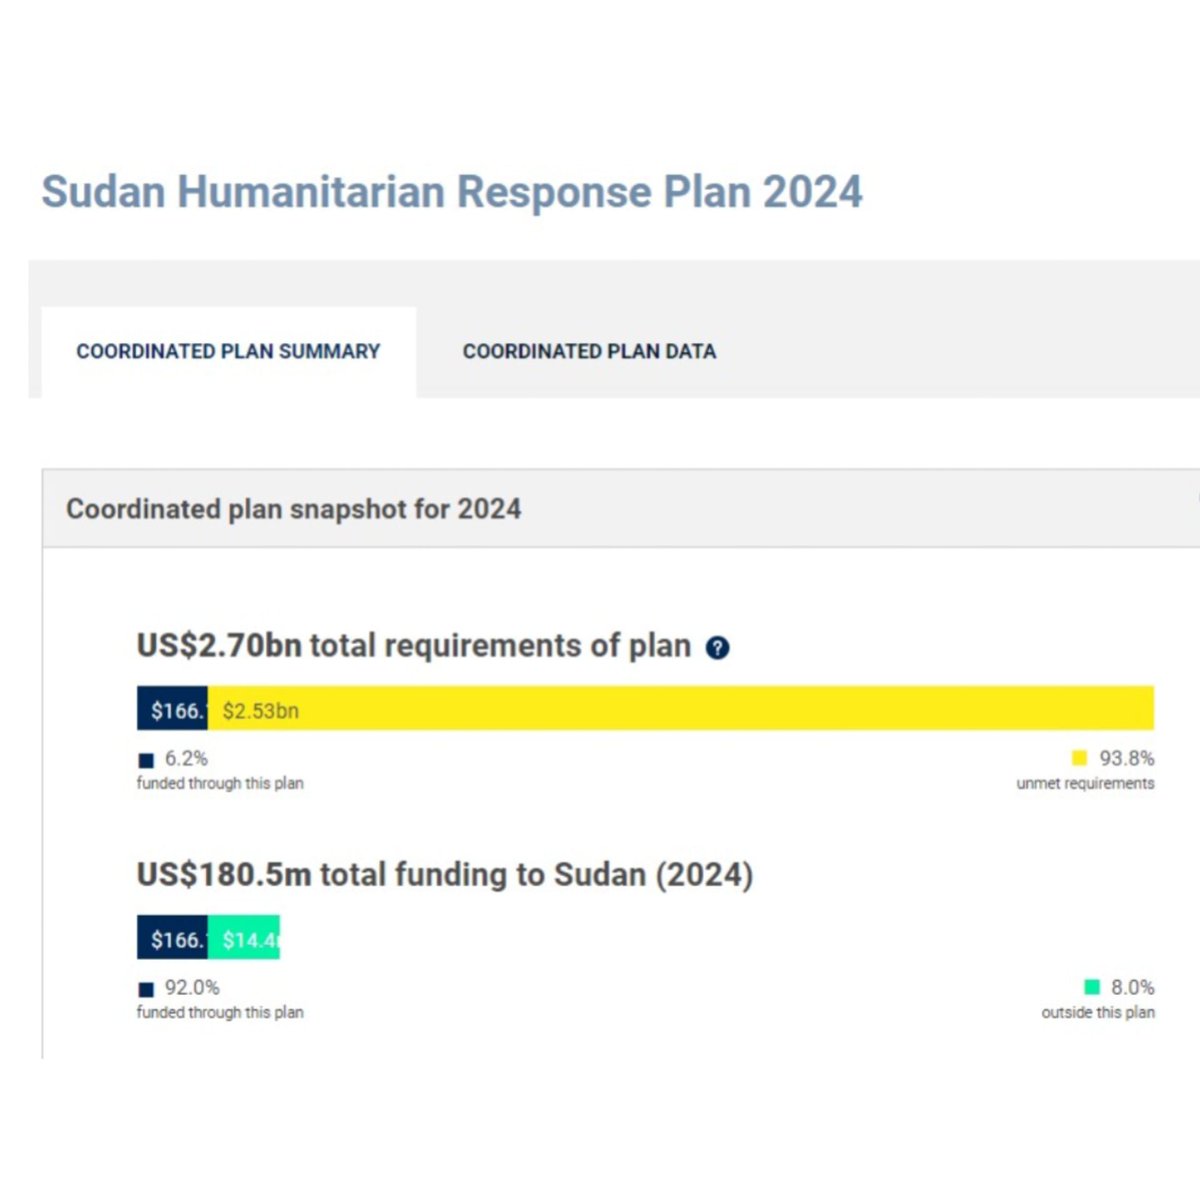 After a year of war, Sudan faces one of the worst humanitarian disasters in recent history. Thousands are dead, millions displaced & starving. Yet the UN response is woefully underfunded. UK must urgently step up diplomatic efforts to increase global funding. #KeepEyesOnSudan